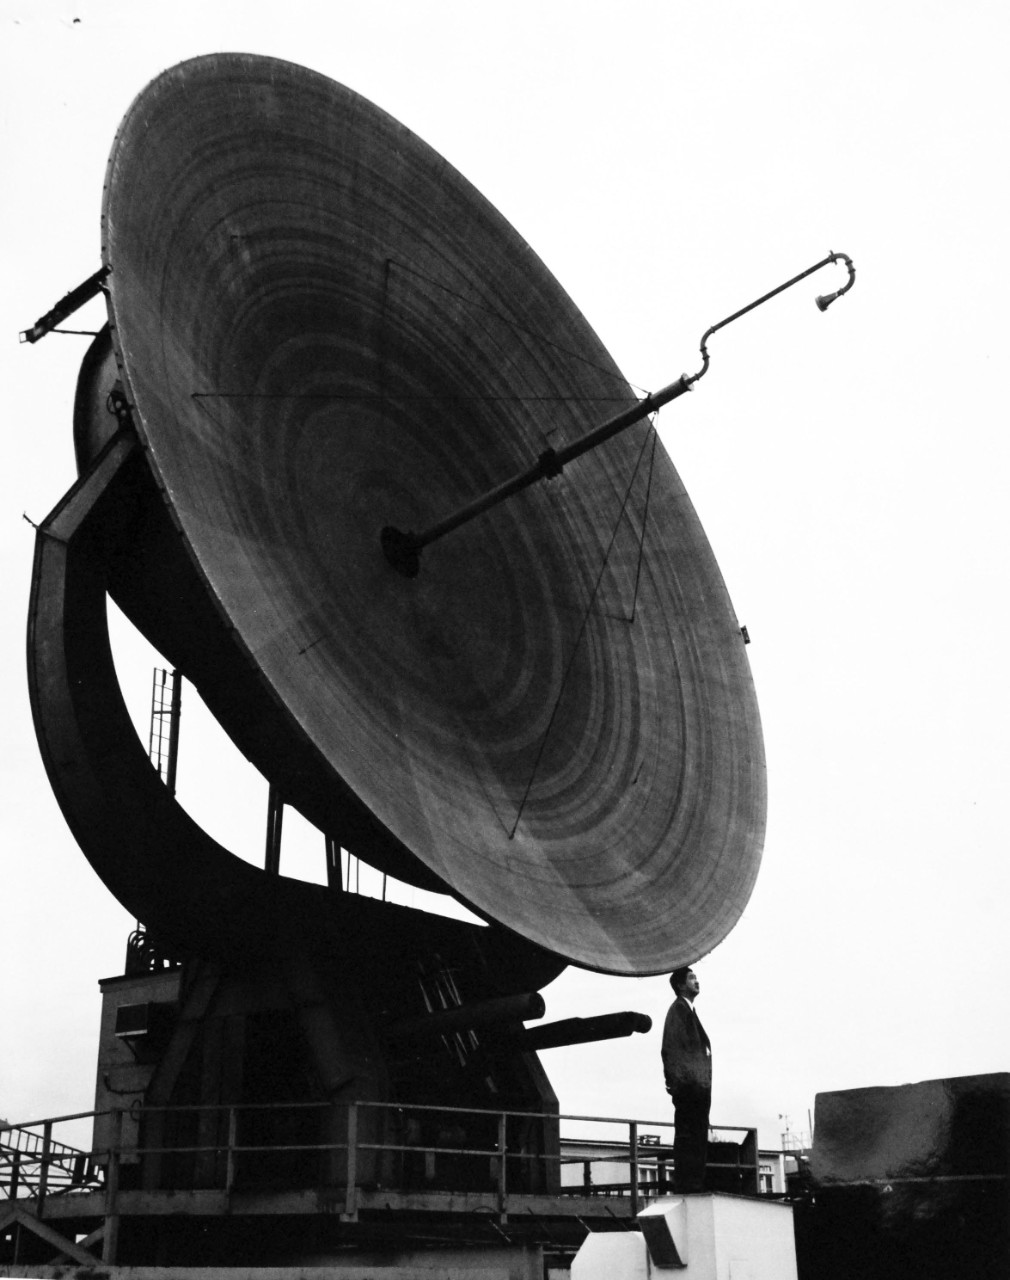 USN 709931:   600-Inch Radar Telescope.   Radar astronomers at the Naval Research Laboratory are using this 600 inch radar telescope to make direct measurements of the distance from the Earth to the Moon.  Benjamin S. Yaplee and his associates in the radio astronomy branch of the laboratory “bounced” super-high frequency (3000 megacycles) radar signal off the moon with this installation on February 24, 1957.  More precise information on relative sizes of the Earth and Moon may be derived with this scientific tool, September 3, 1957.  (Official U.S. Navy photograph, now in the collection of the National Archives.   